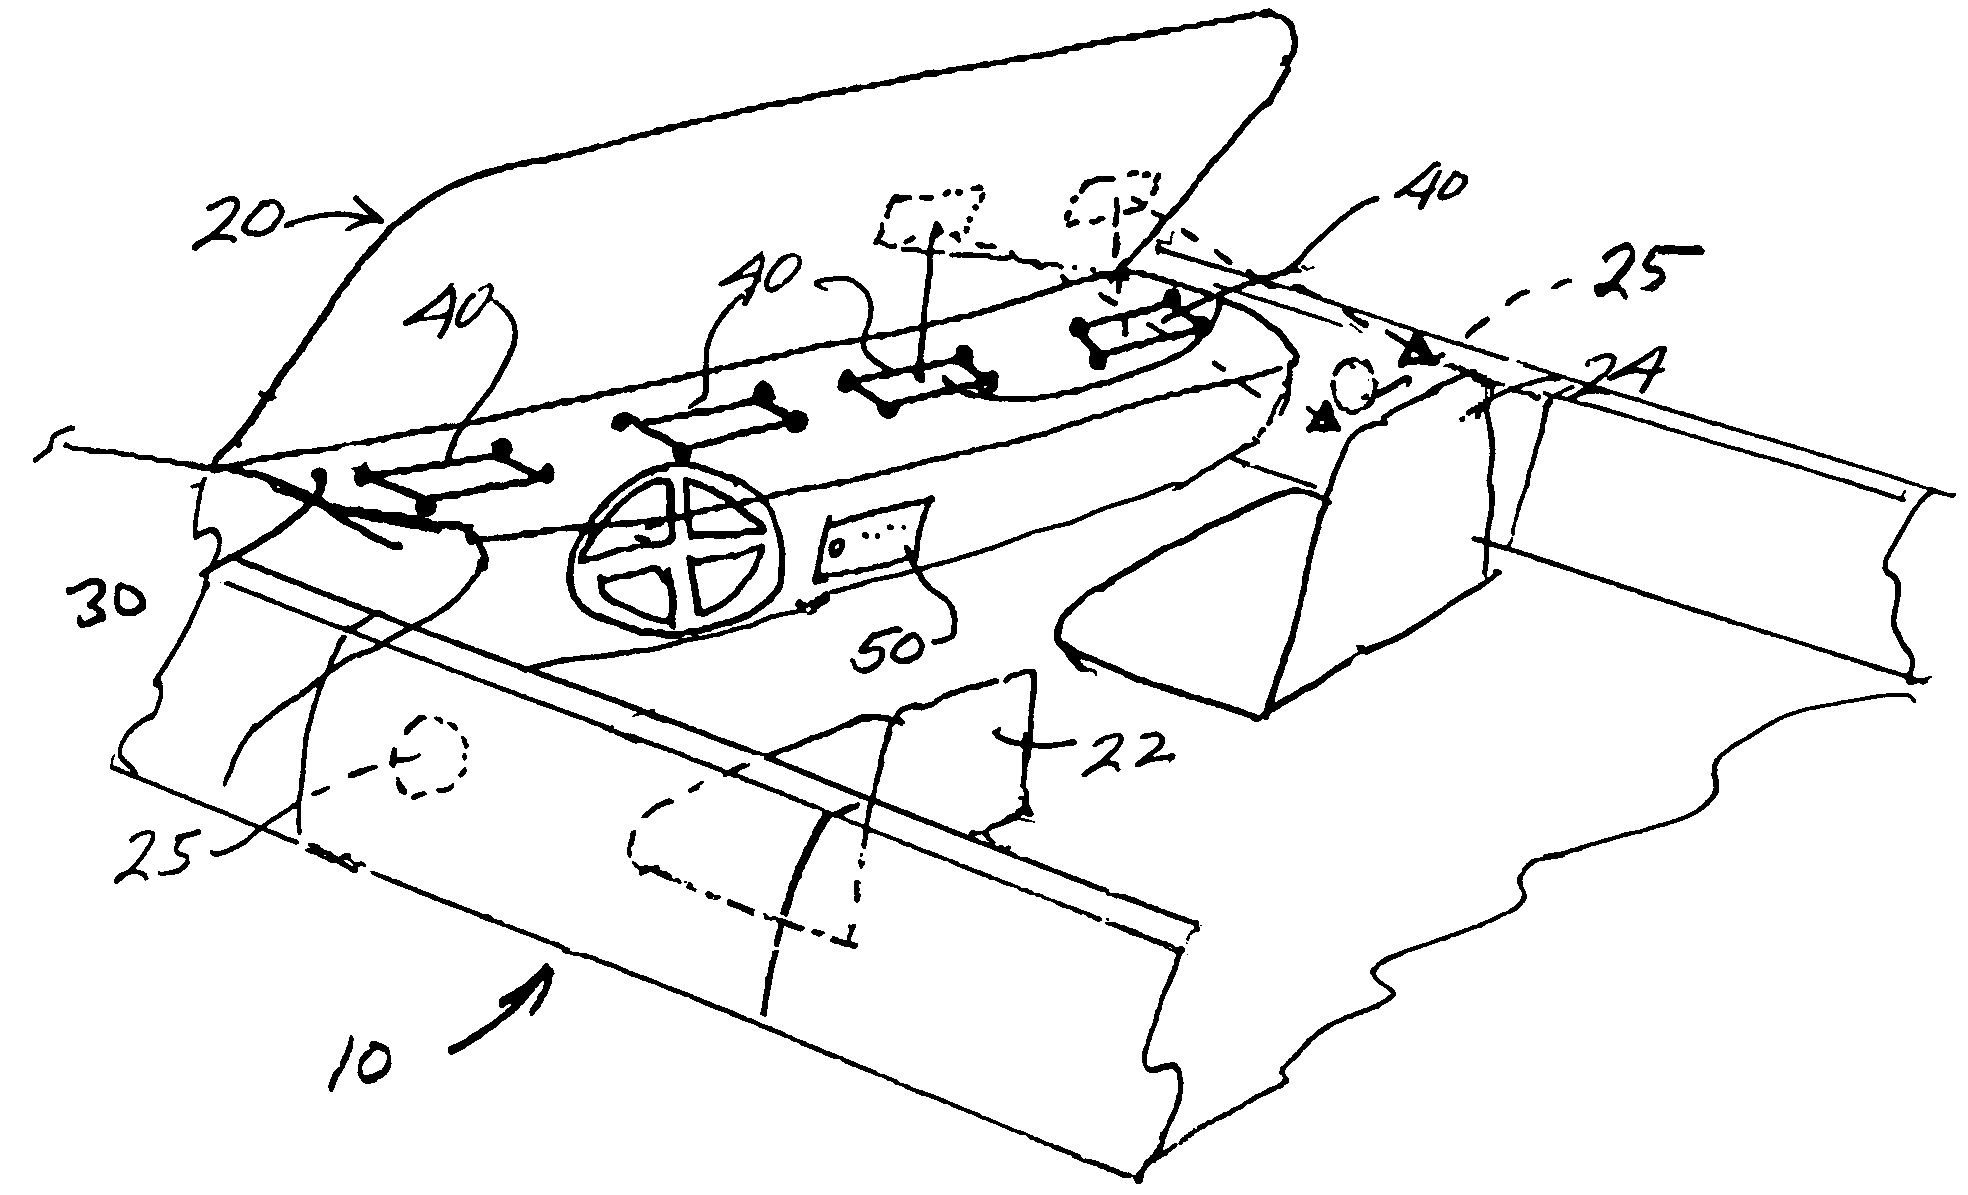 Vehicle audio system with directional sound and reflected audio imaging for creating a personal sound stage